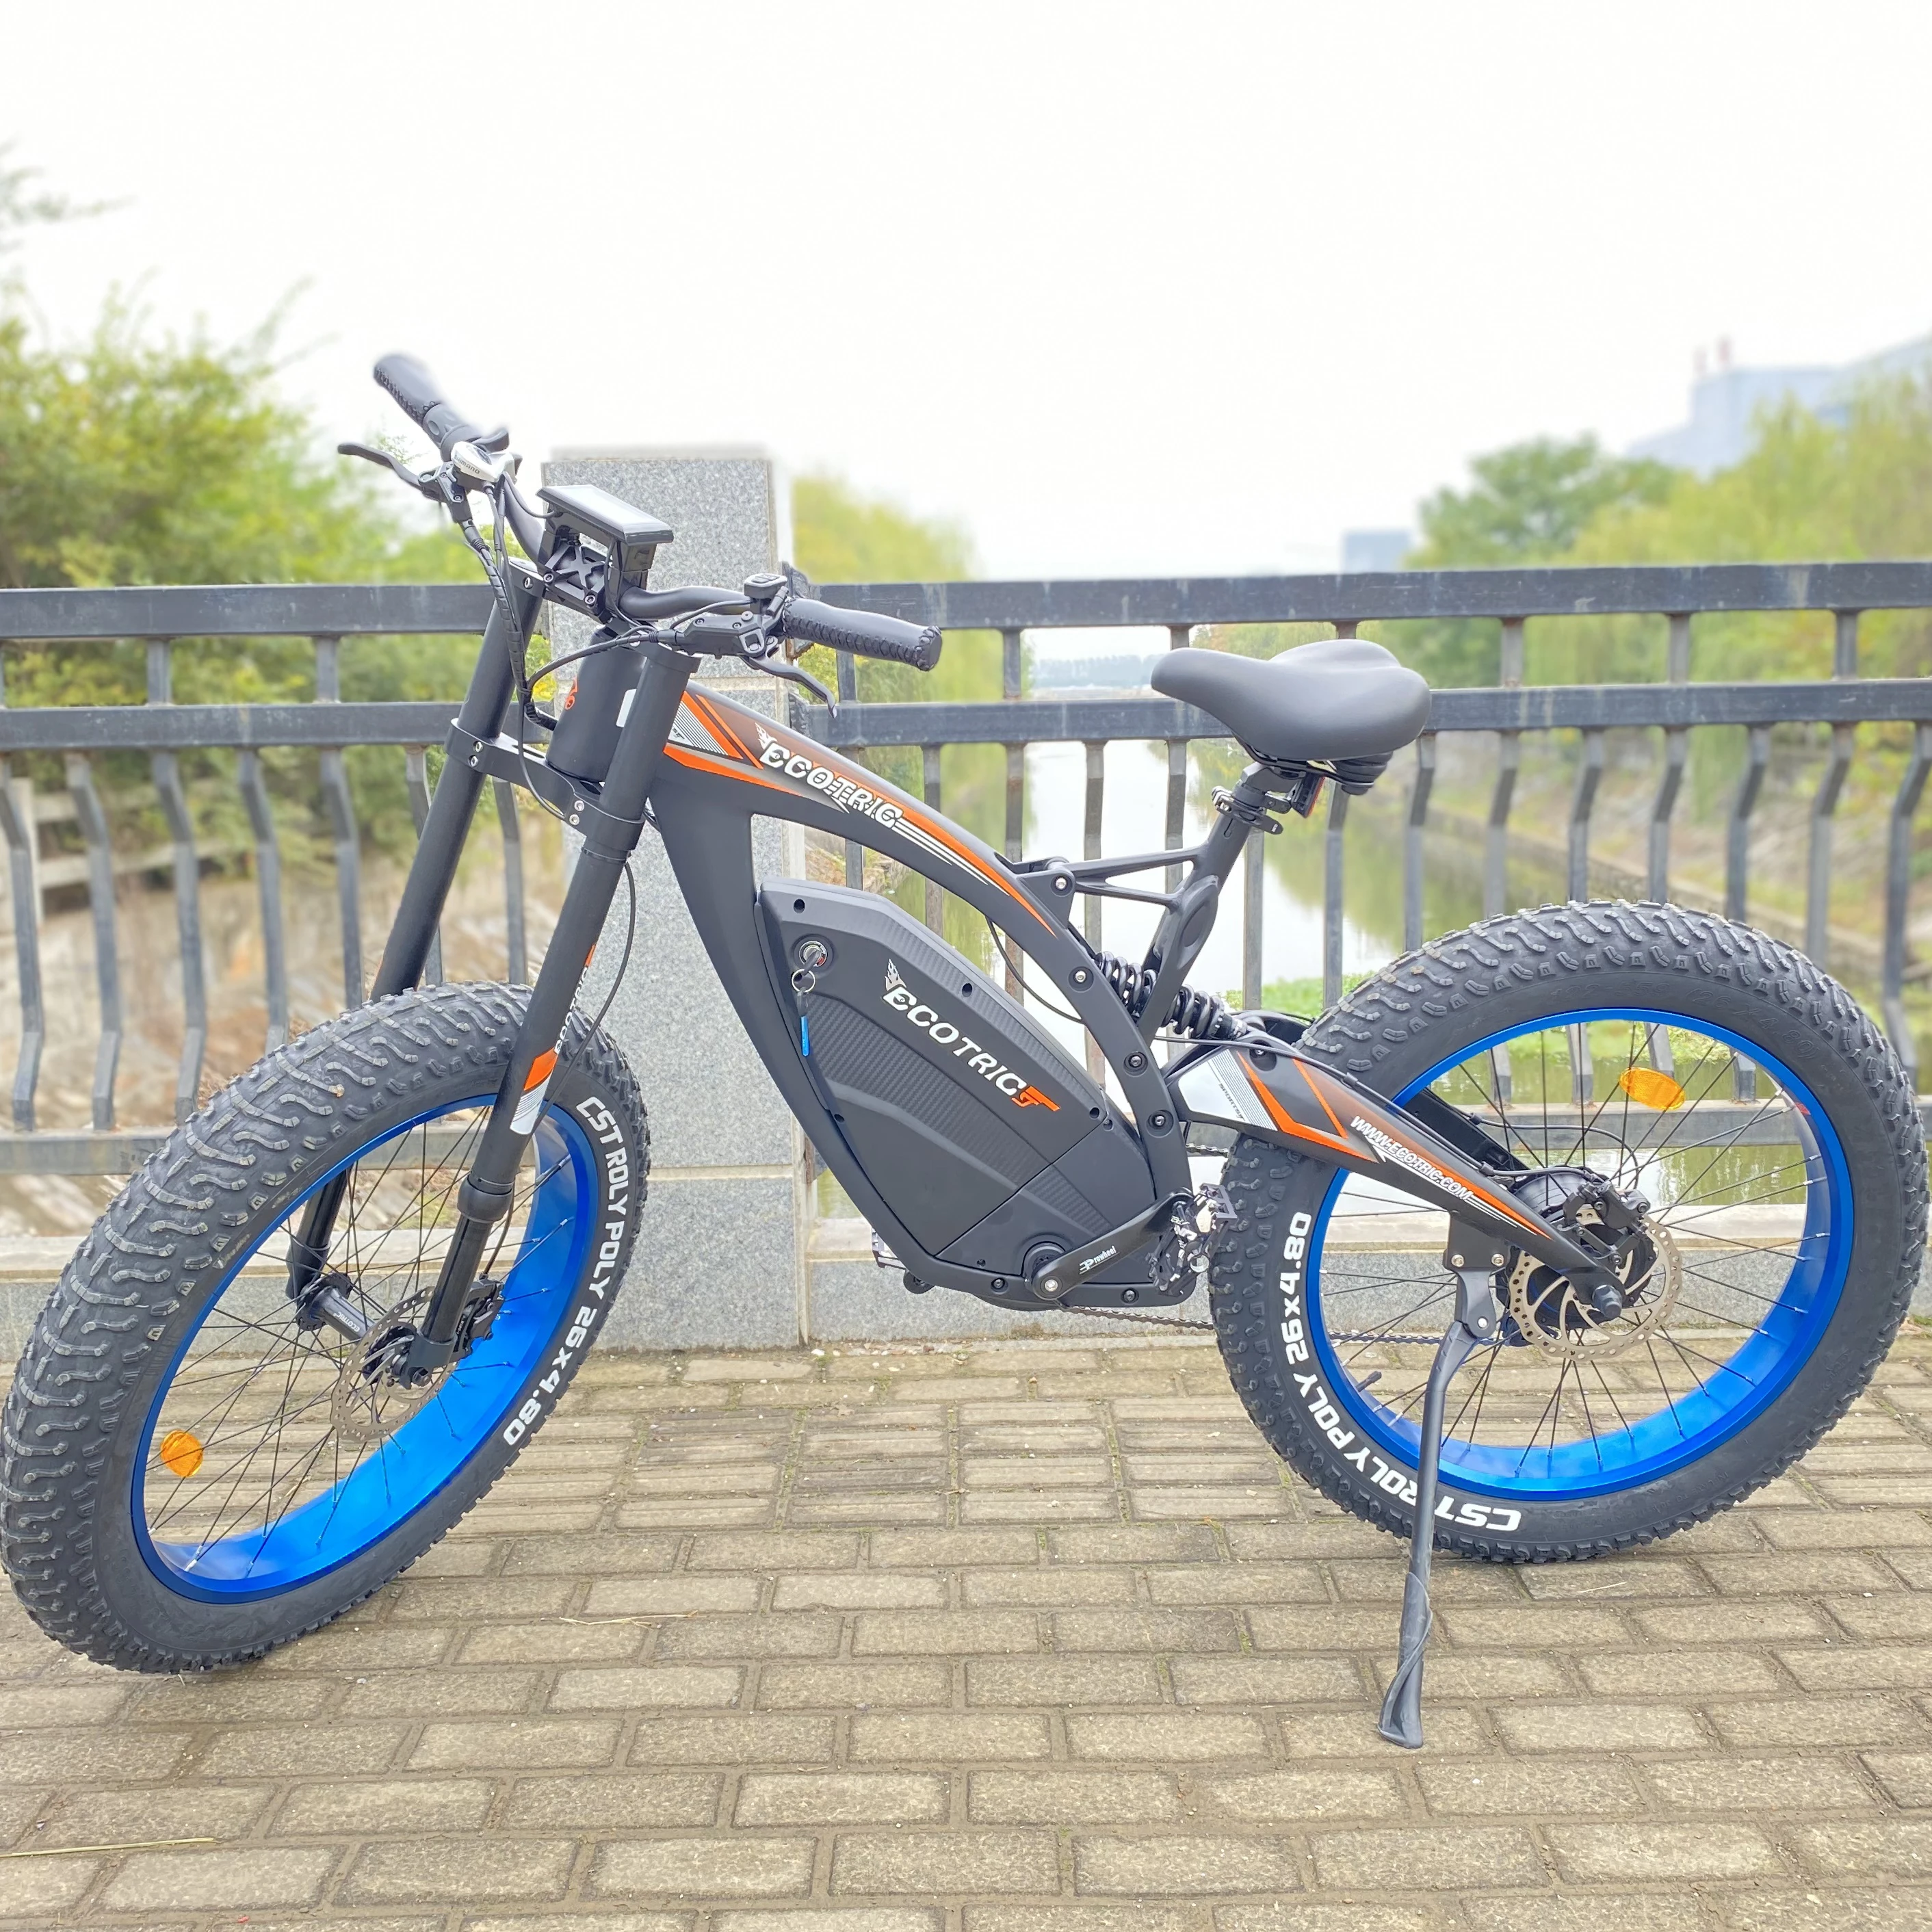 

New arrived 48V 1000W/1500W ebike BISON26 full suspension adjustable mtb electric e bichcle bike for adults